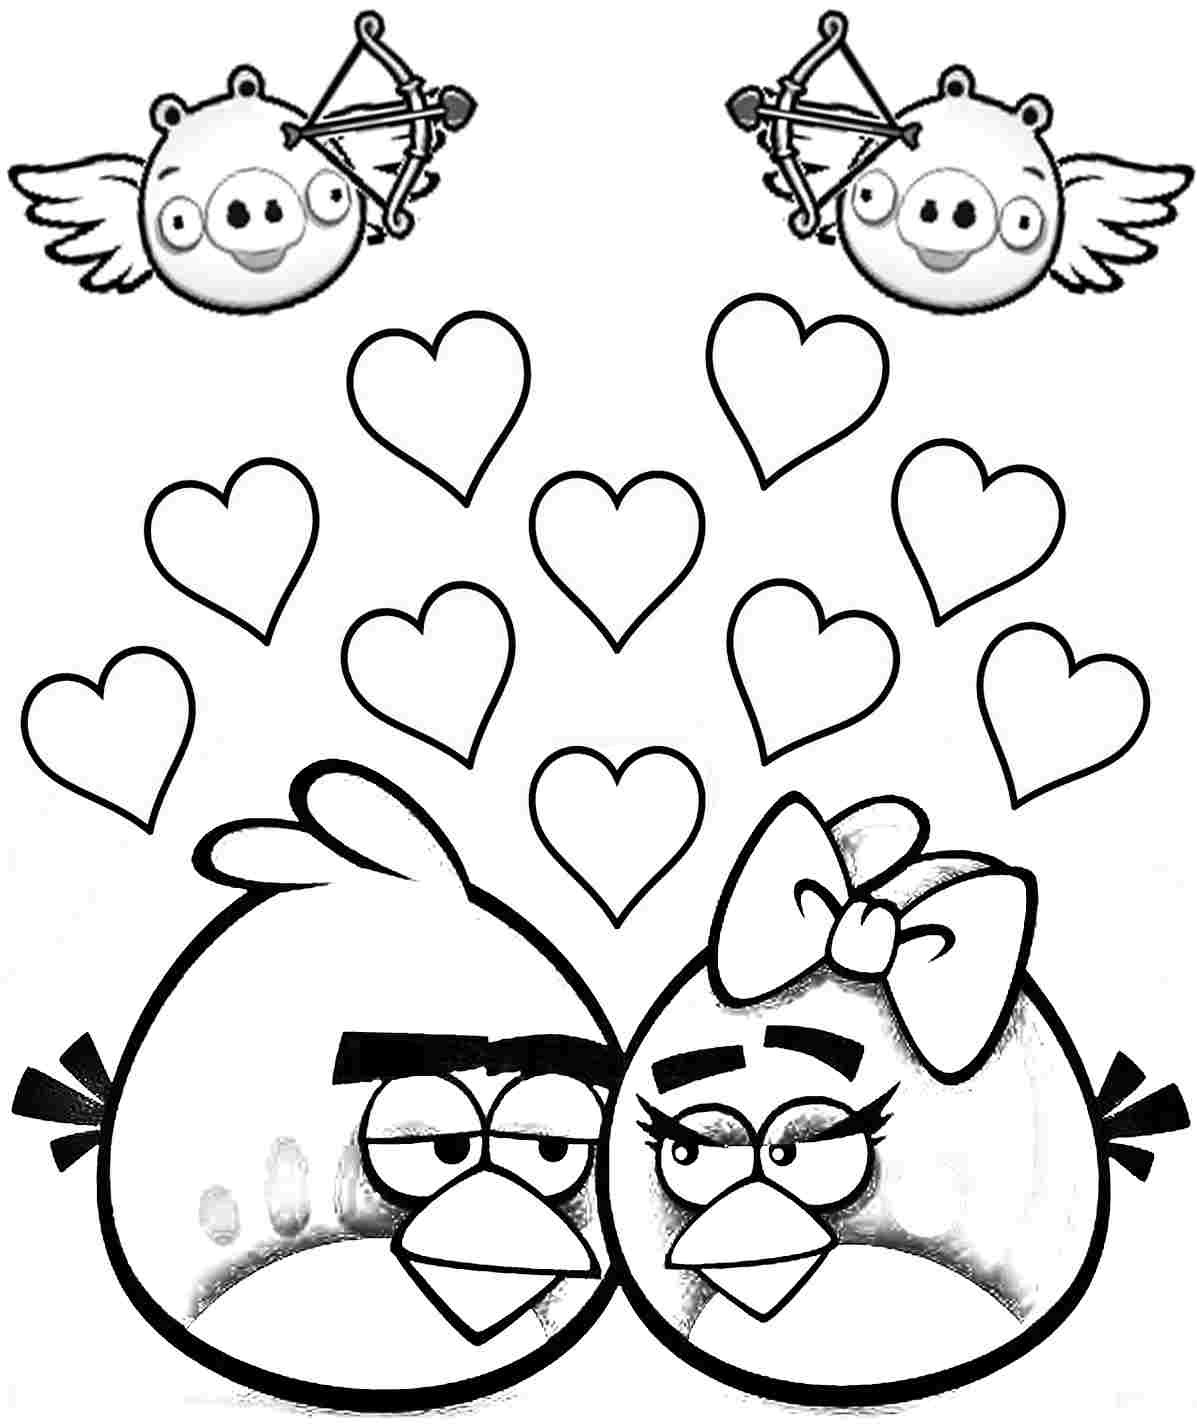 Luxury Printable Valentines Day Coloring Pages 93 In Gallery Coloring Ideas with Printable Valentines Day Coloring